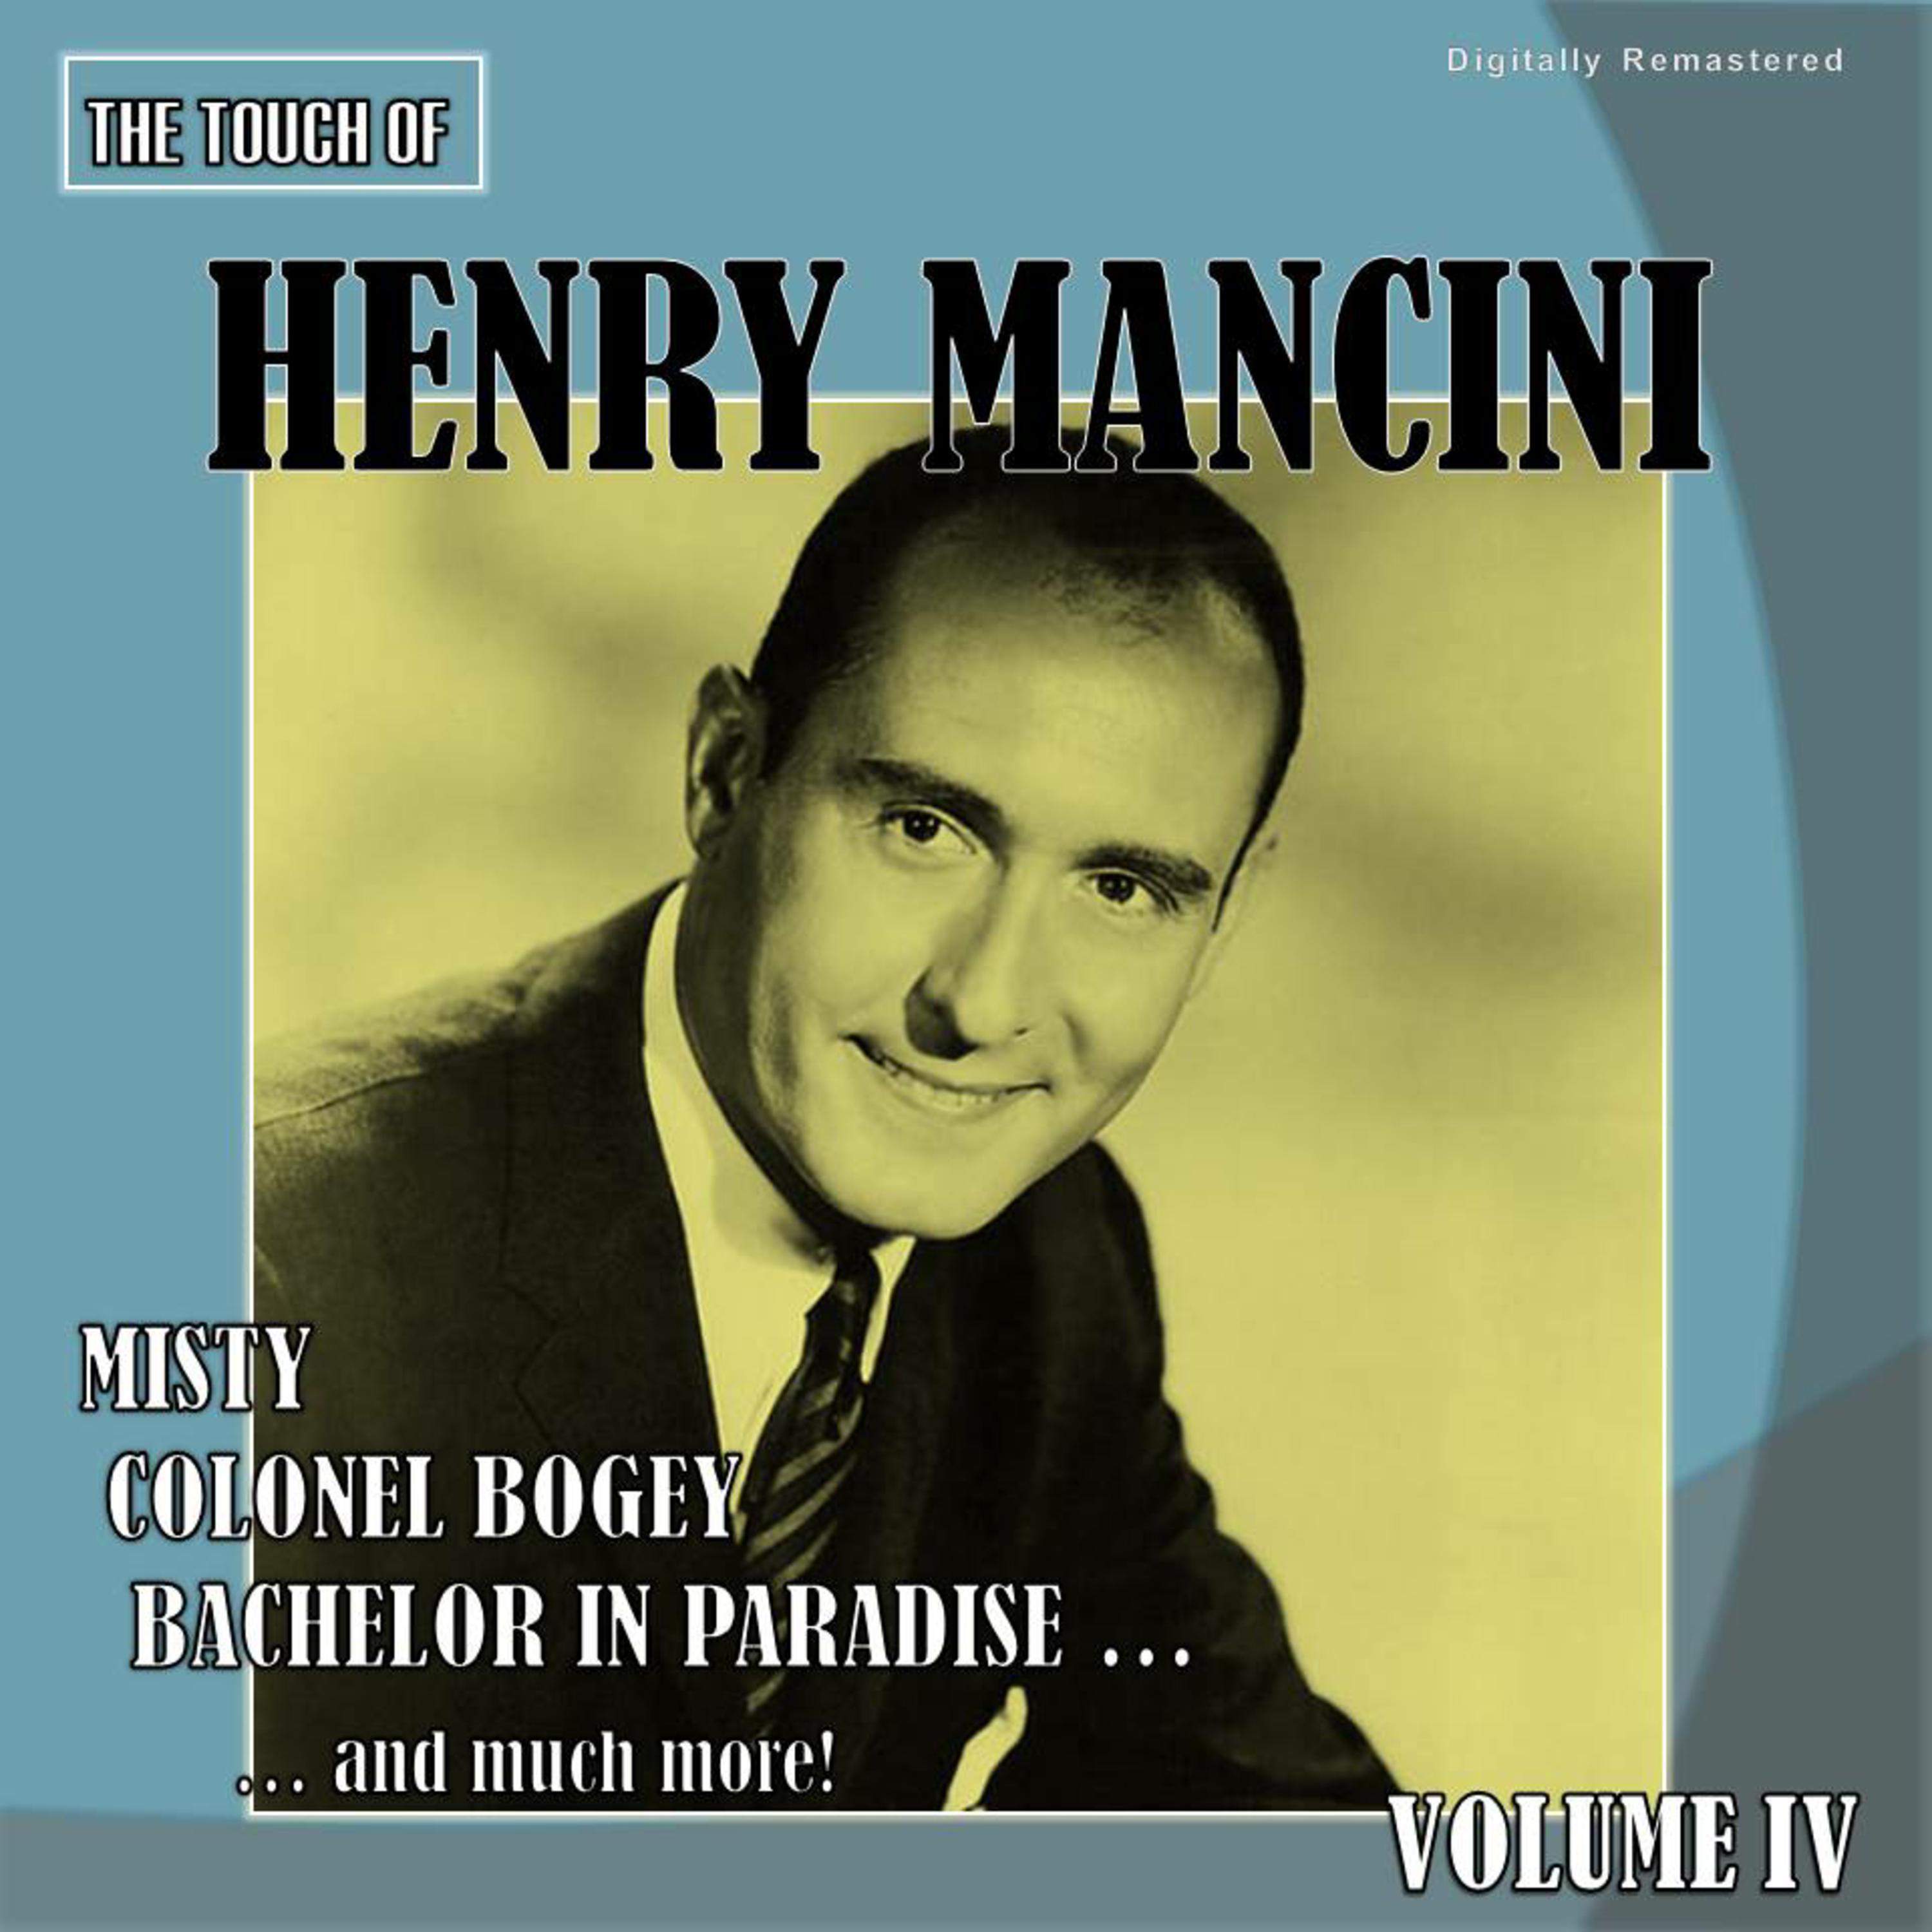 The Touch of Henry Mancini, Vol. 4 (Digitally Remastered)